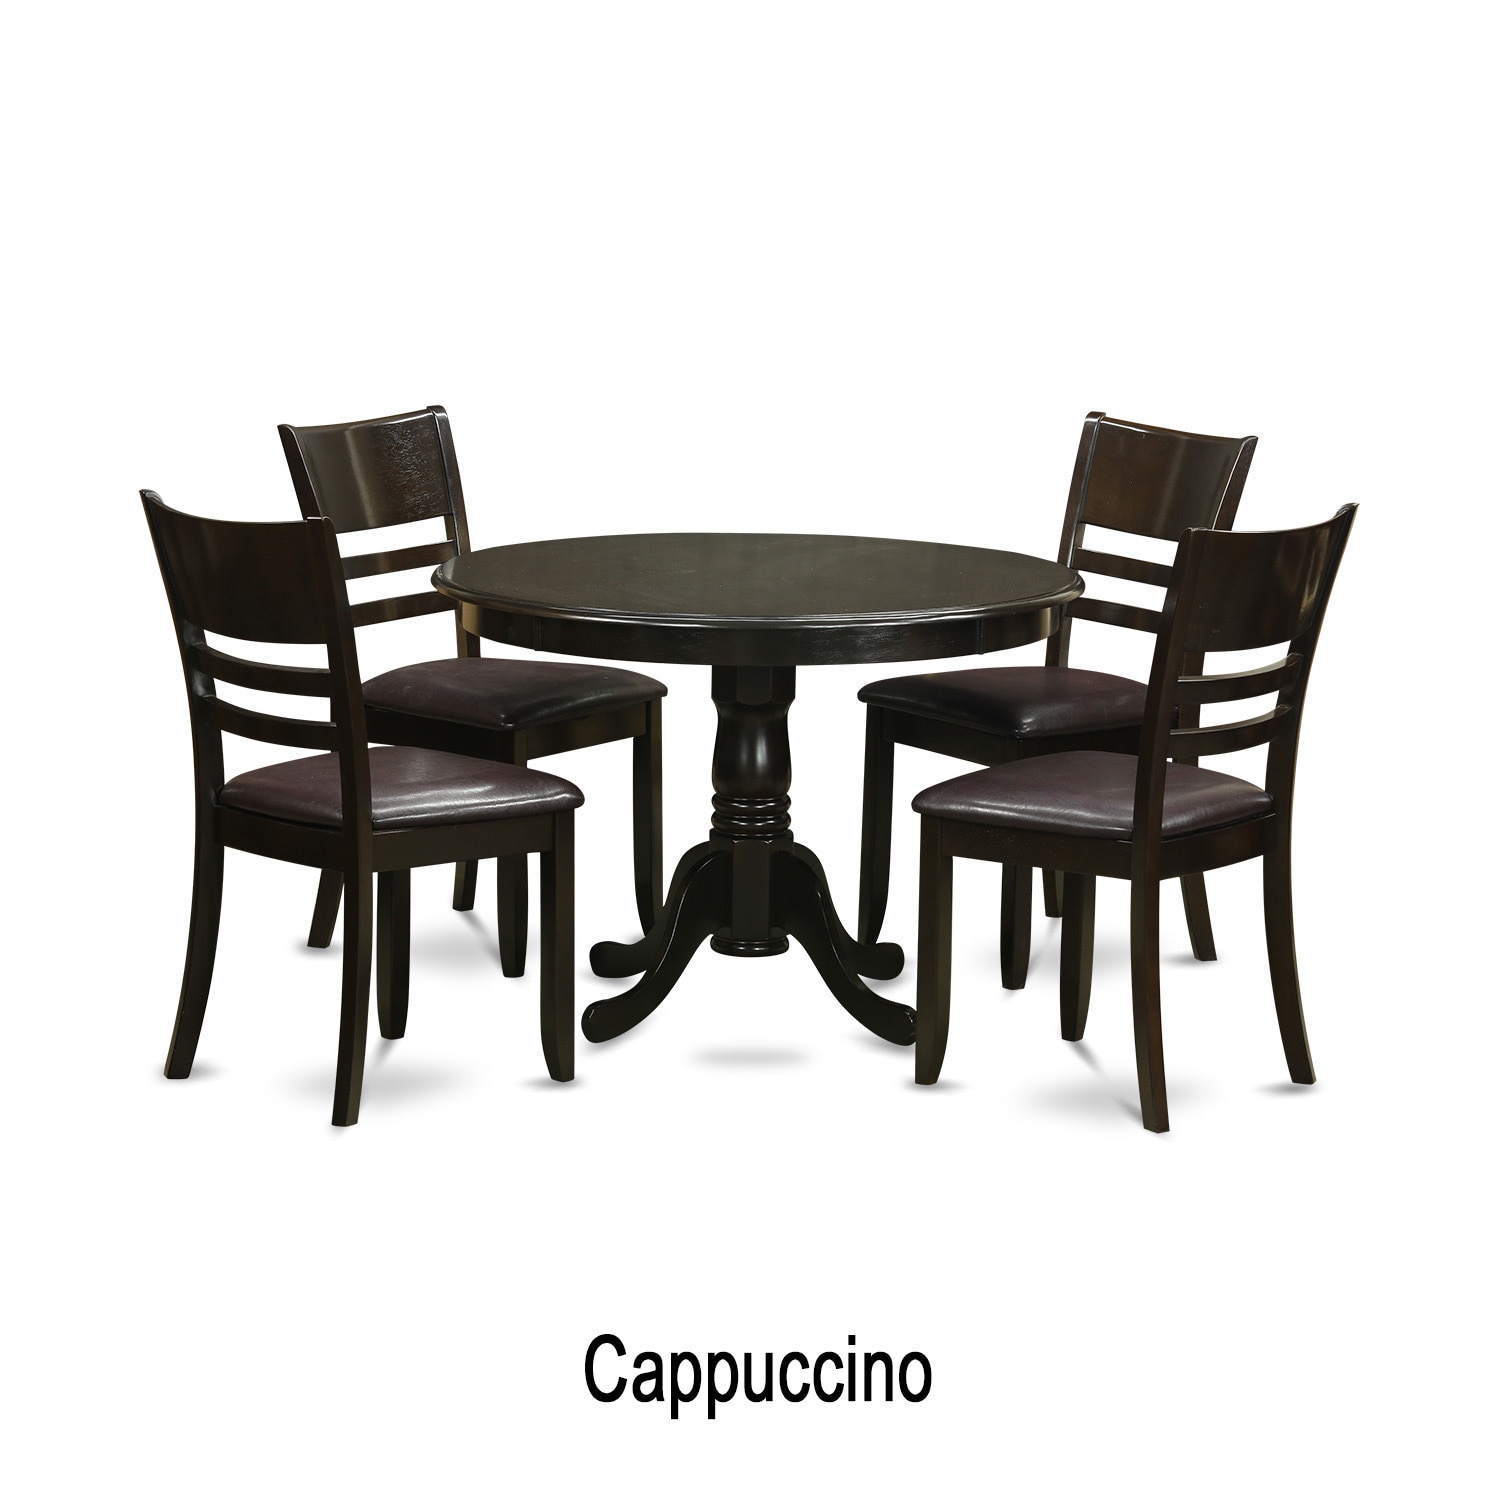 5 Piece Small Dining Table And 4 Dinette Chairs On Sale Overstock 10296444